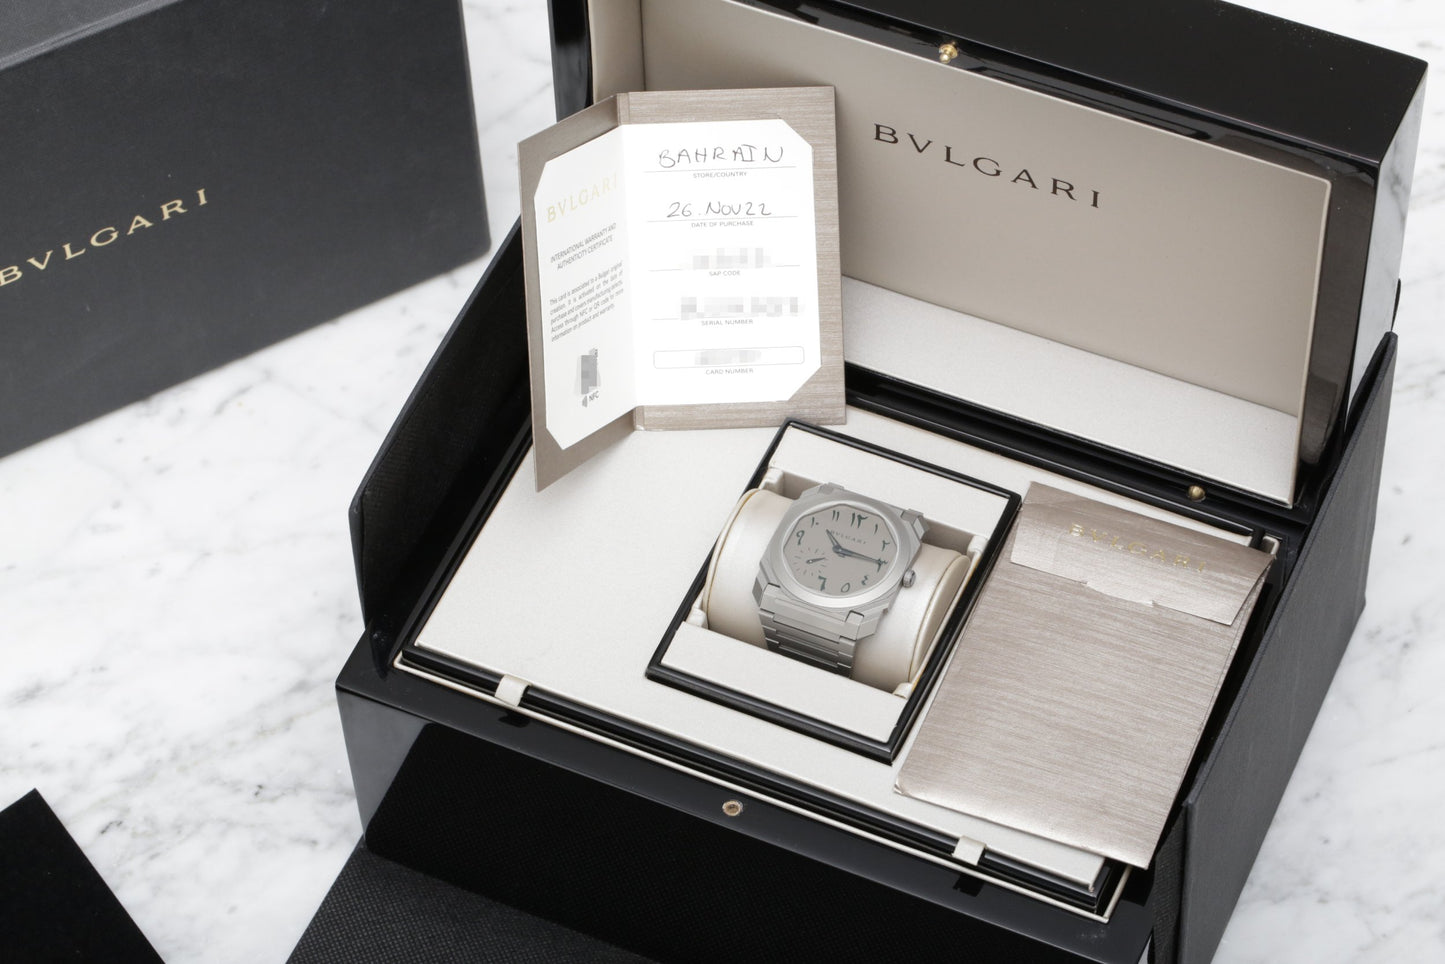 Bvlgari Octo Finissimo Middle East